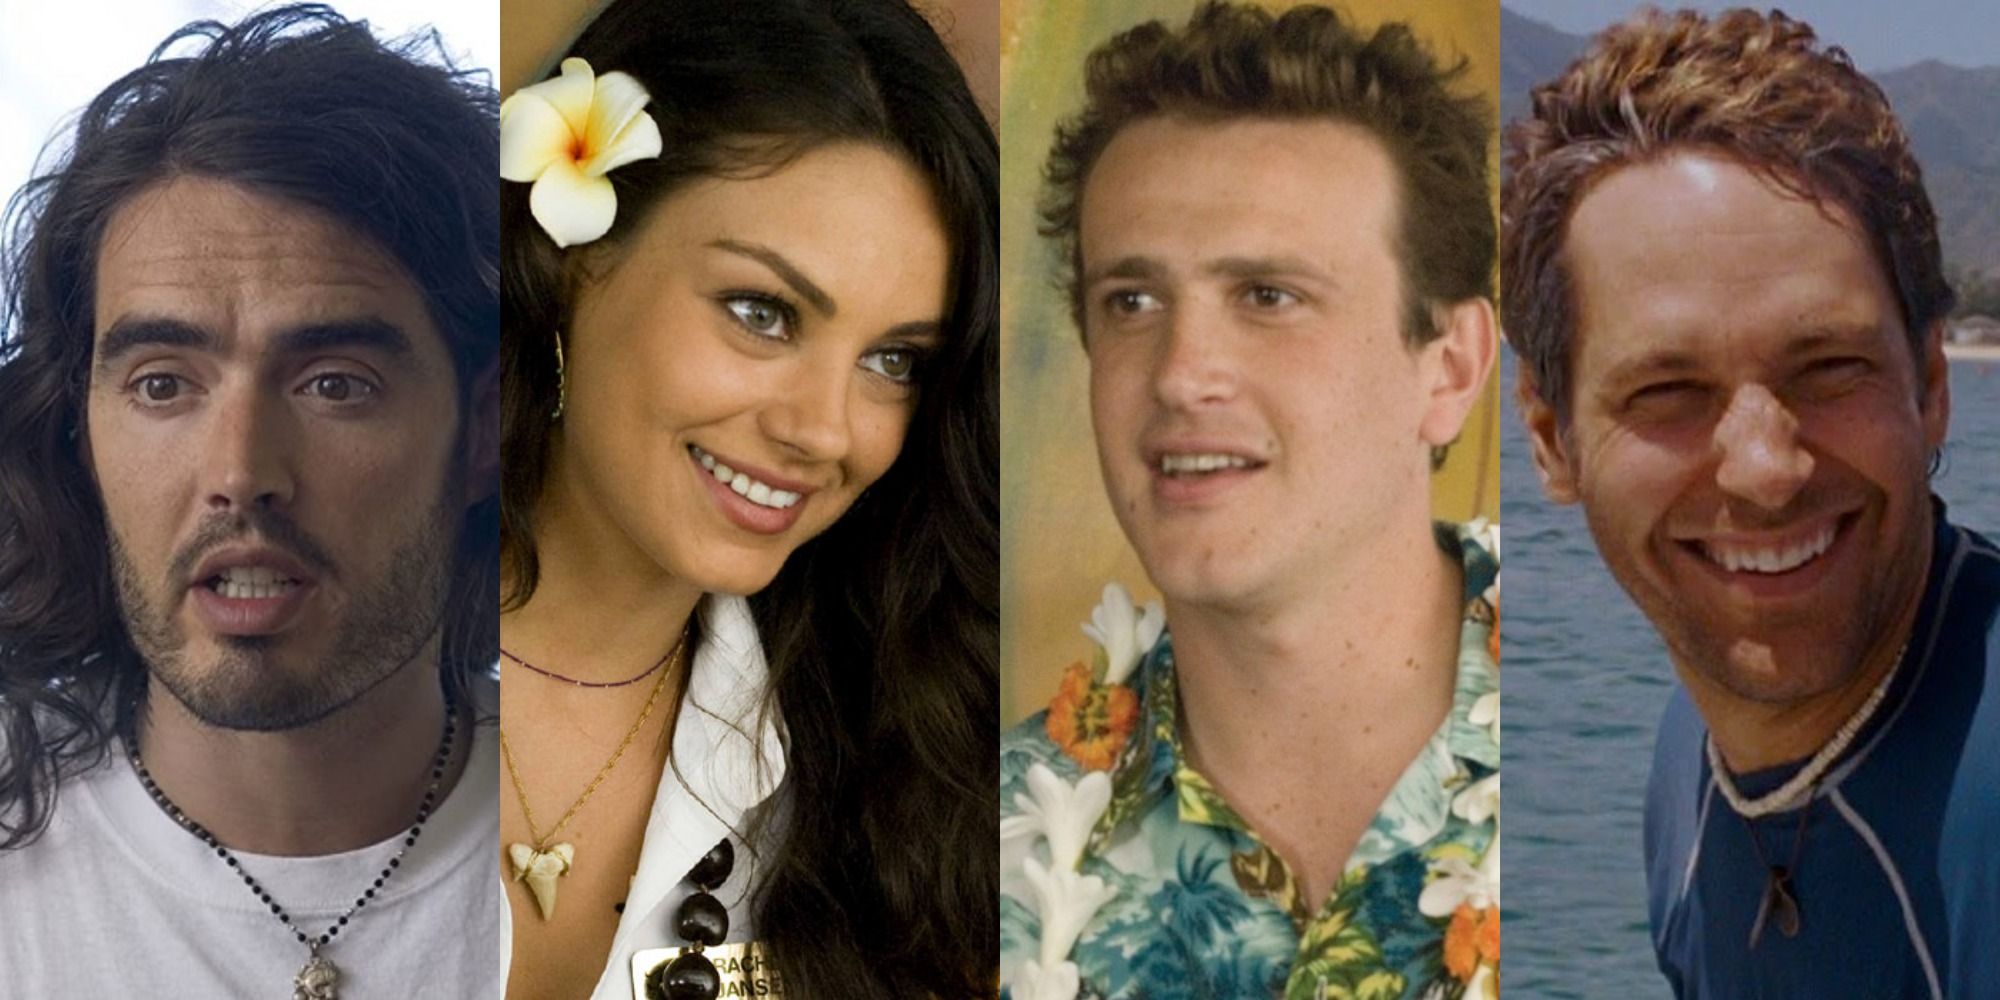 A collage of Russel Brand, Mila Kunis, Jason Segel and Paul Rudd in Forgetting Sarah Marshall